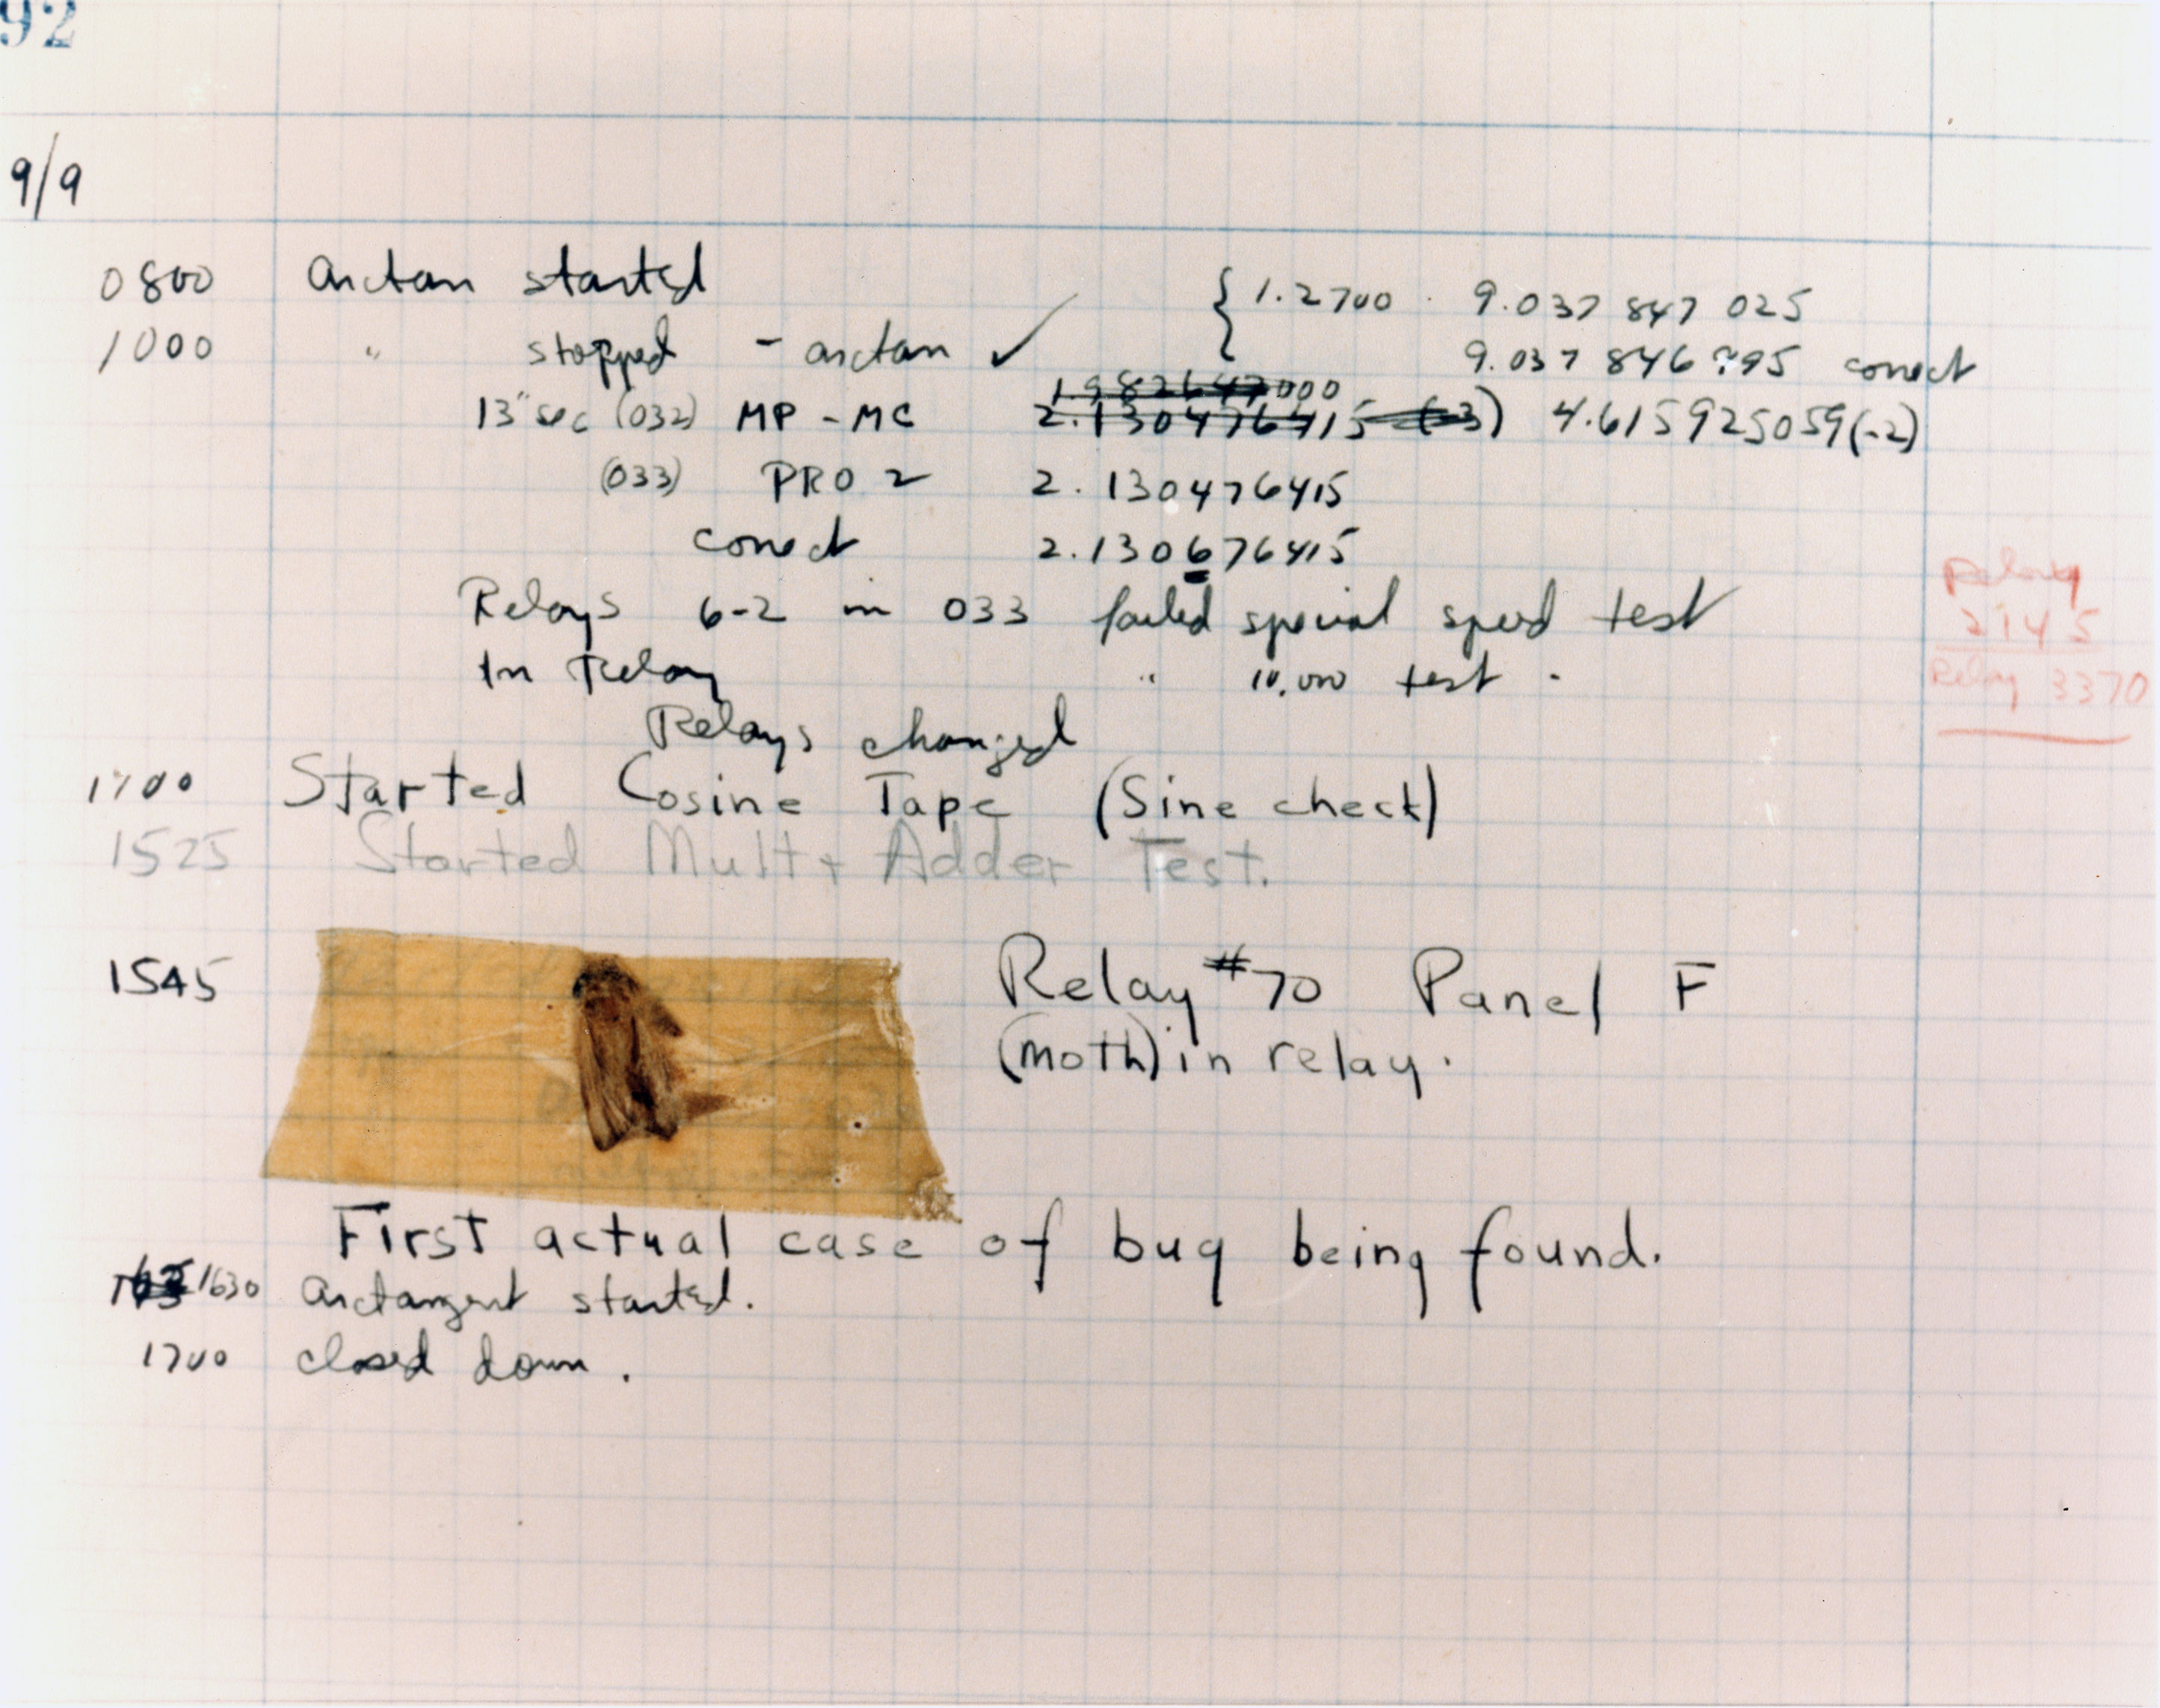 Page of Grace Hoppers Logbook, a moth is taped onto it next to some handwritten notes.